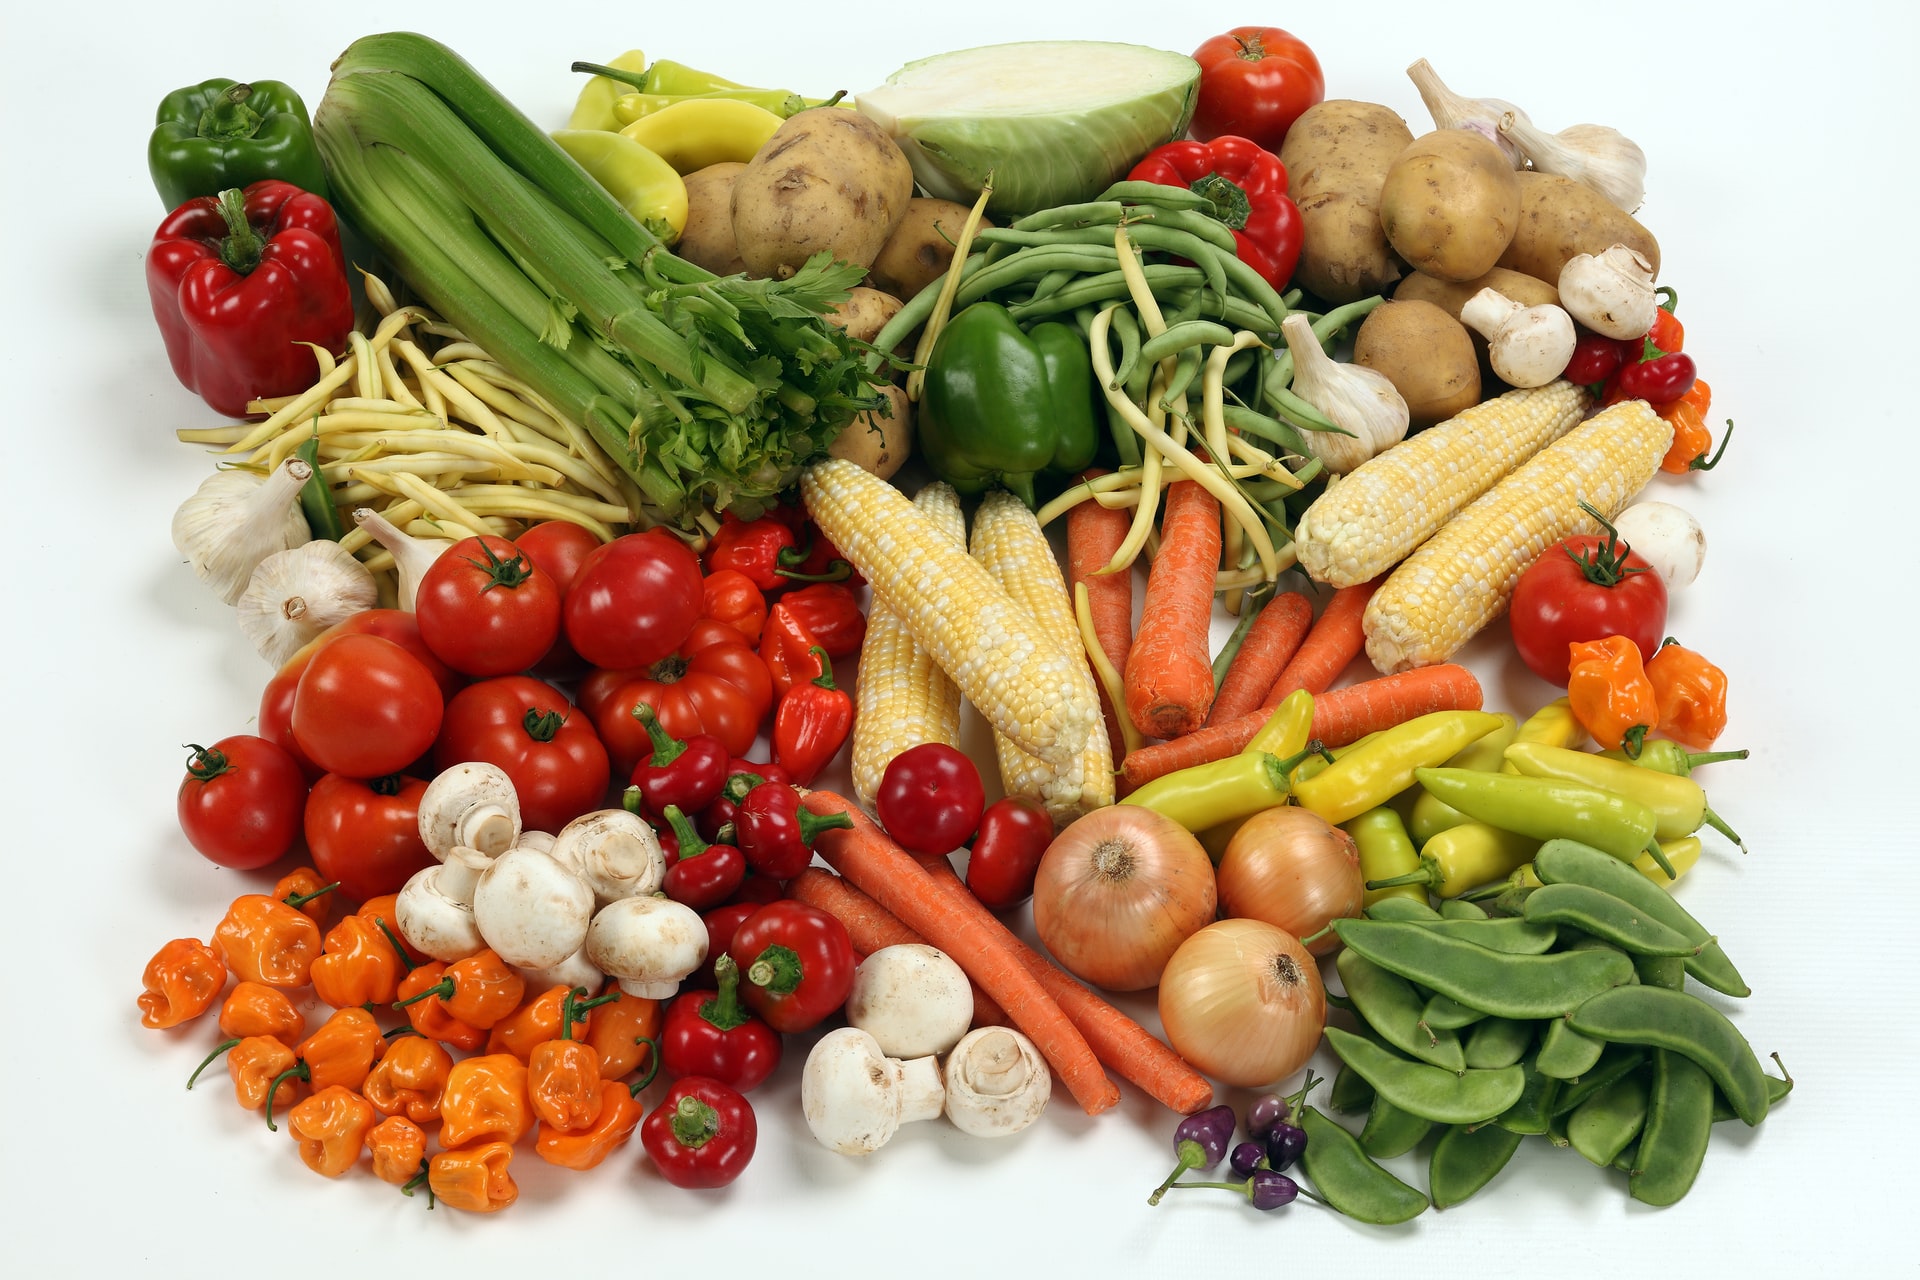 How does a vegetarian diet affect athletic performance?